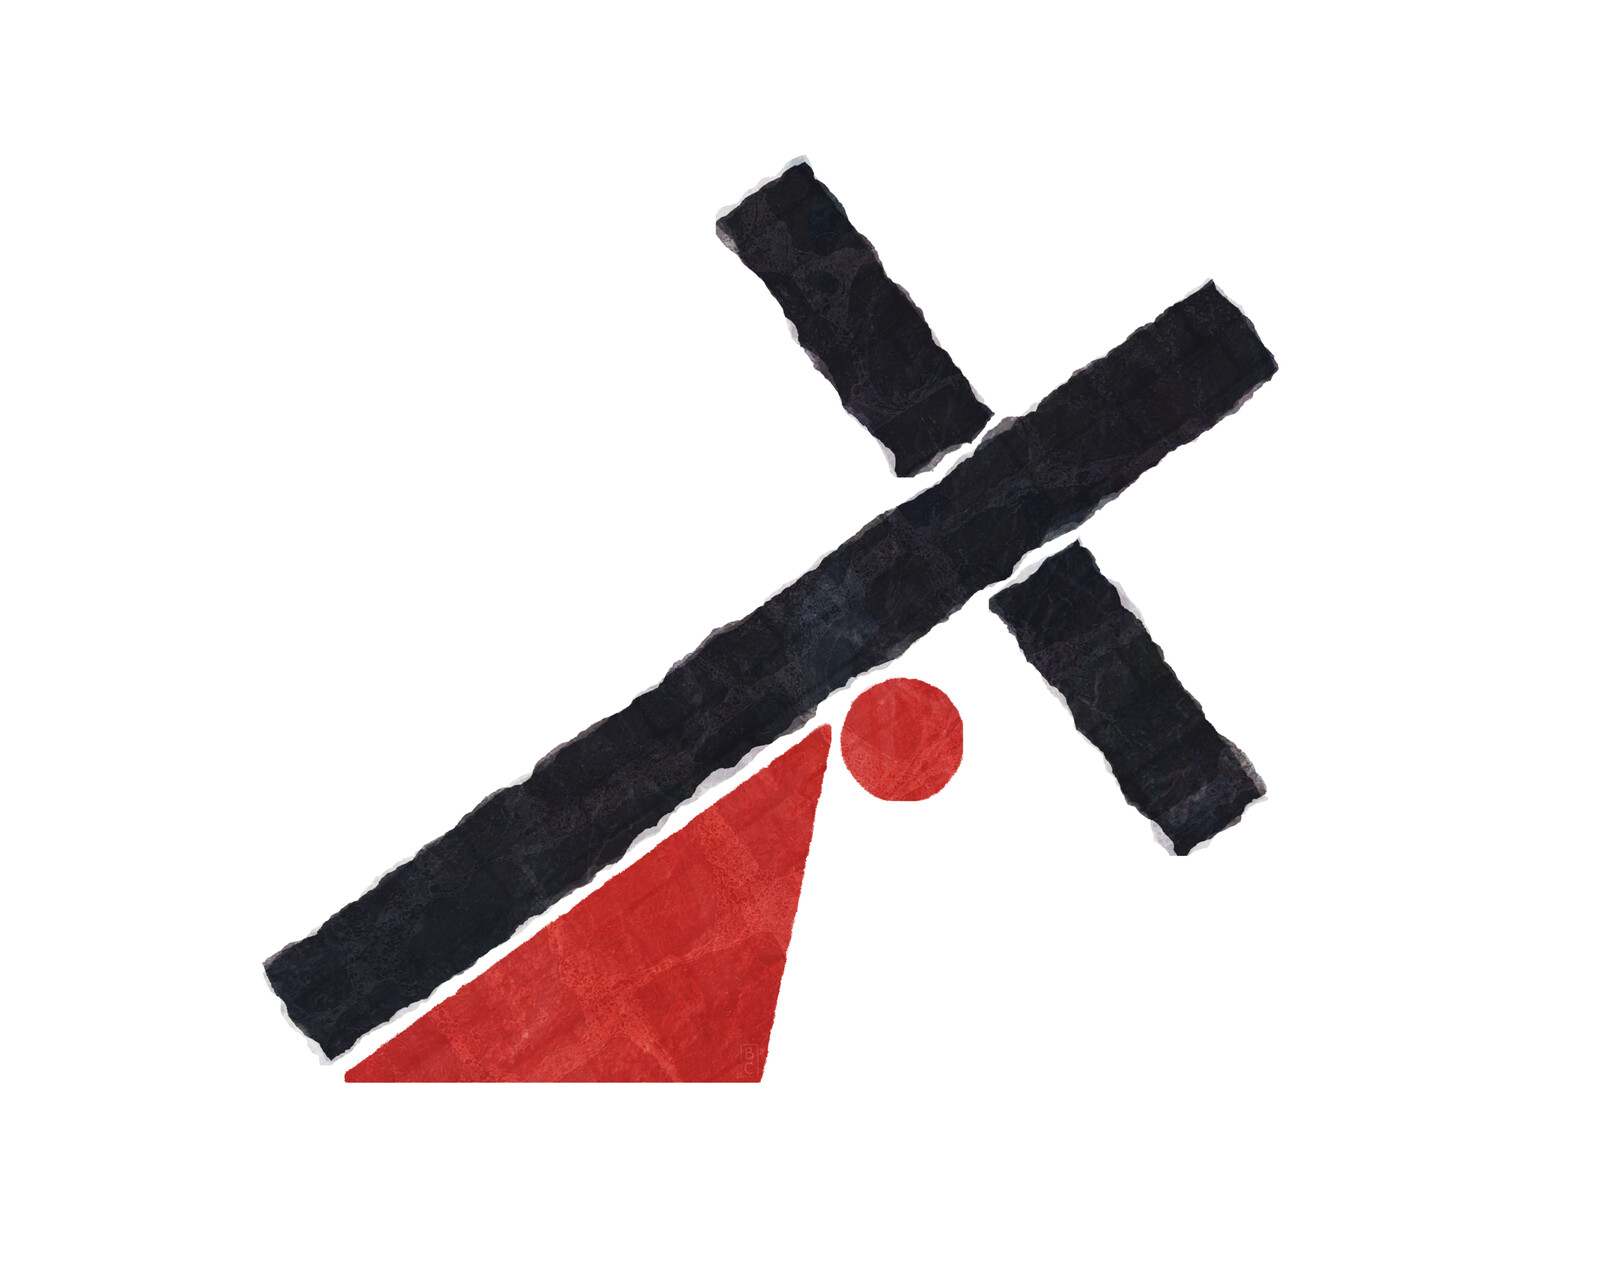 A red circle-and-triangle figure carries a black cross.